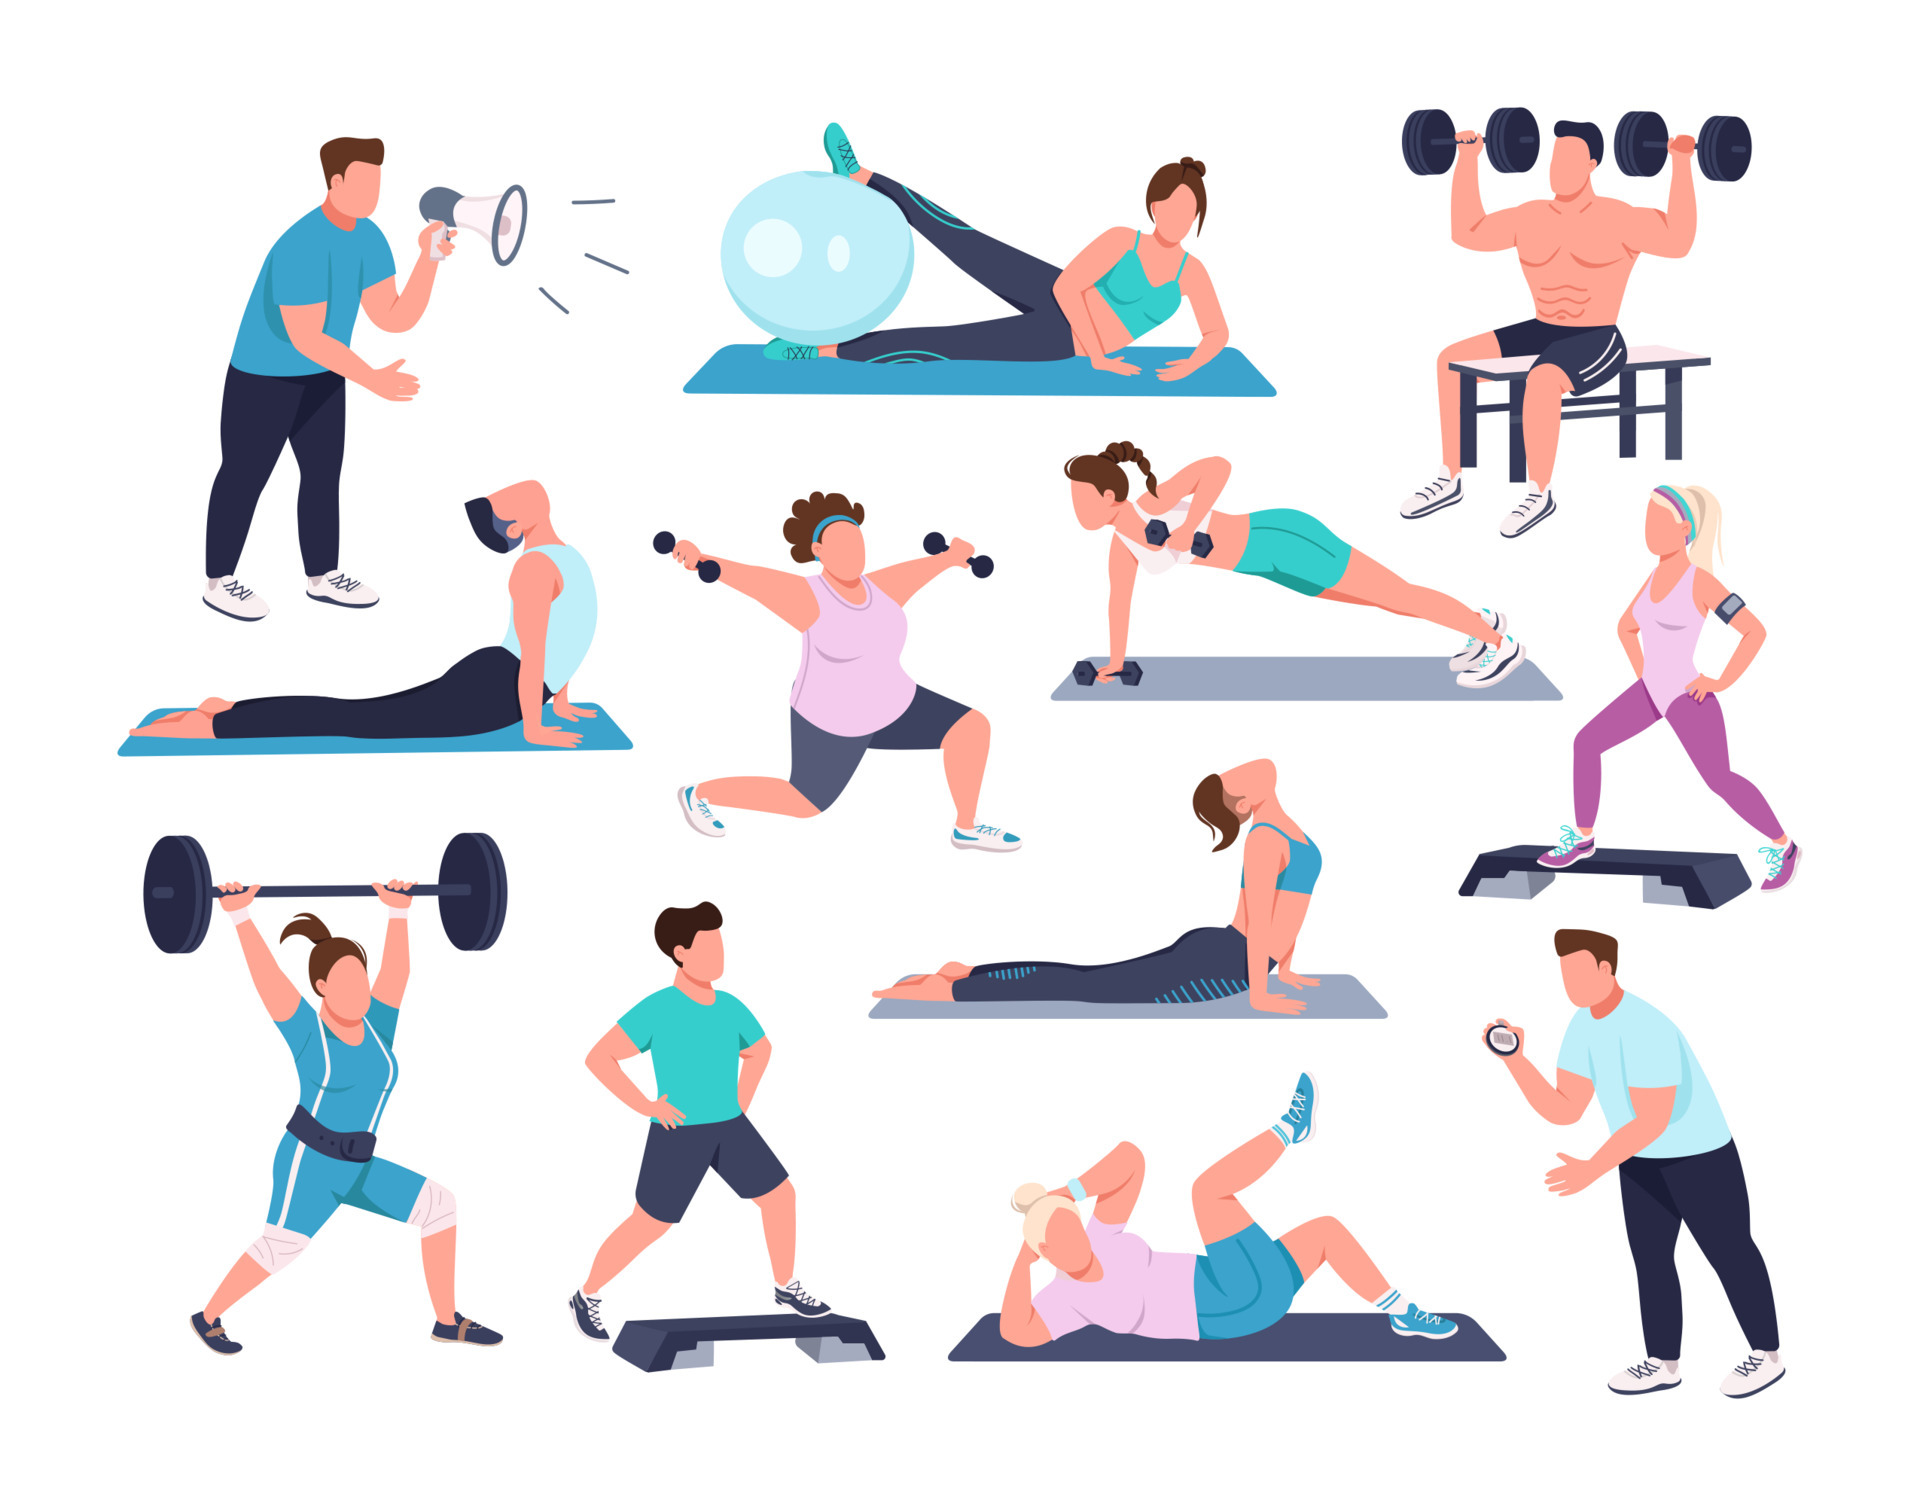 https://static.vecteezy.com/system/resources/previews/004/568/588/original/gym-exercise-semi-flat-color-character-set-posing-figures-full-body-people-on-white-fitness-isolated-modern-cartoon-style-illustration-for-graphic-design-and-animation-collection-vector.jpg